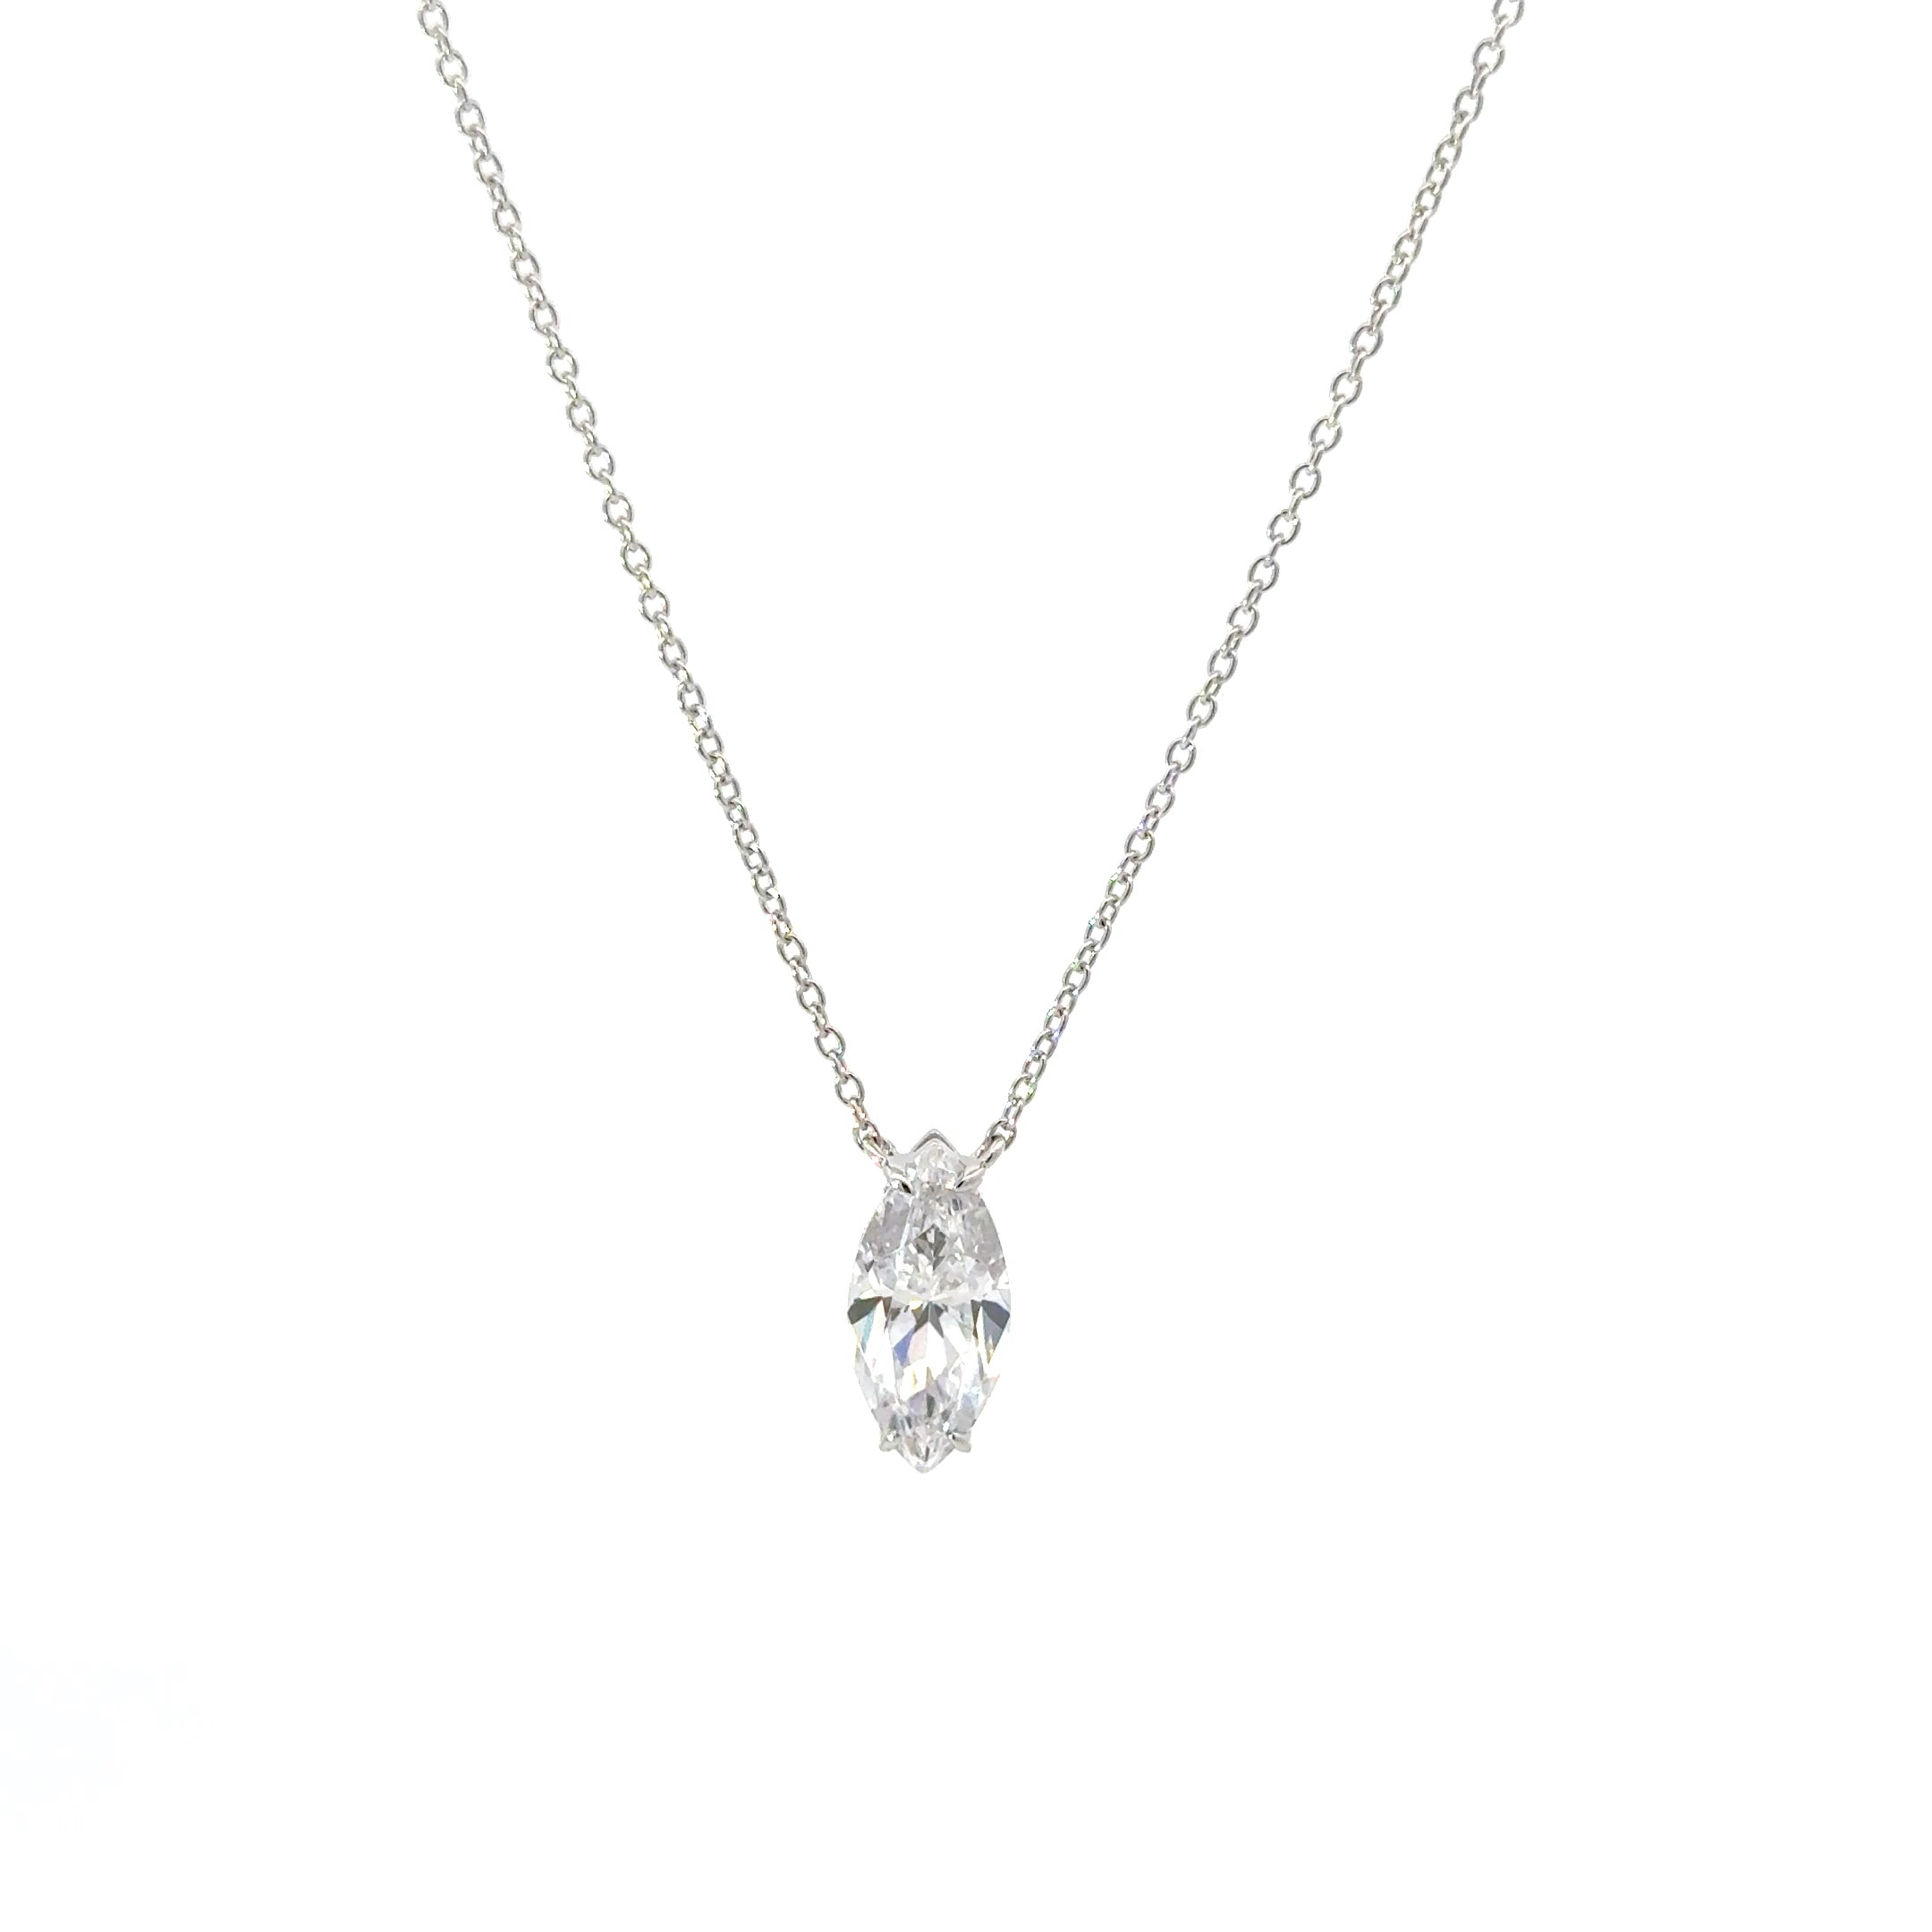 Single Marquise Cut 15 x 7 mm CZ Silver Necklace